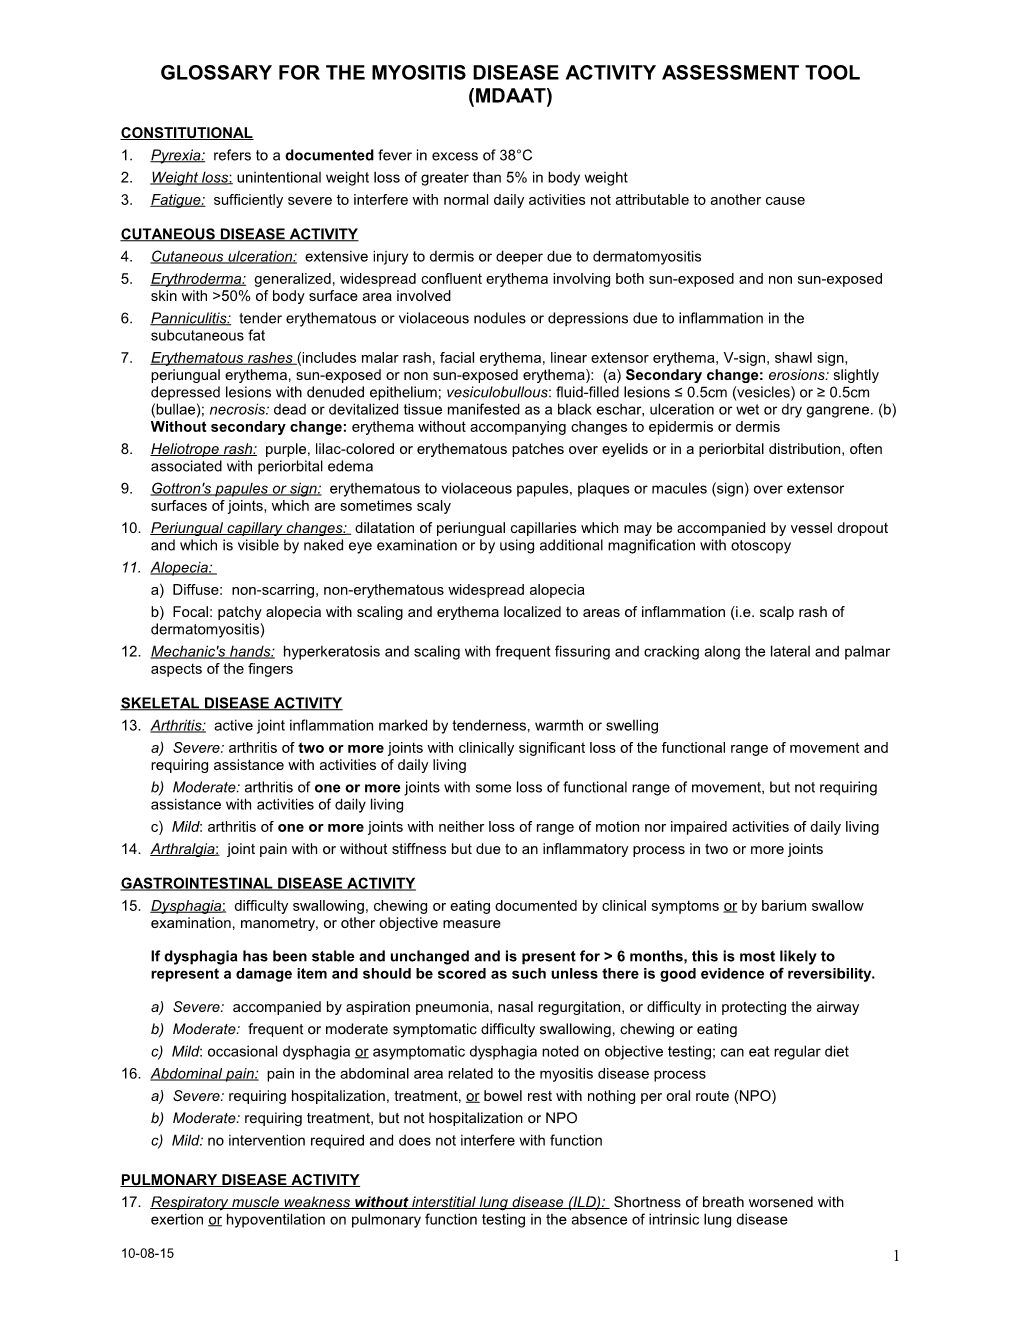 GLOSSARY for the MYOSITIS DISEASE ACTIVITY ASSESSMENT TOOL (MITAX) - 2015 - Word Format